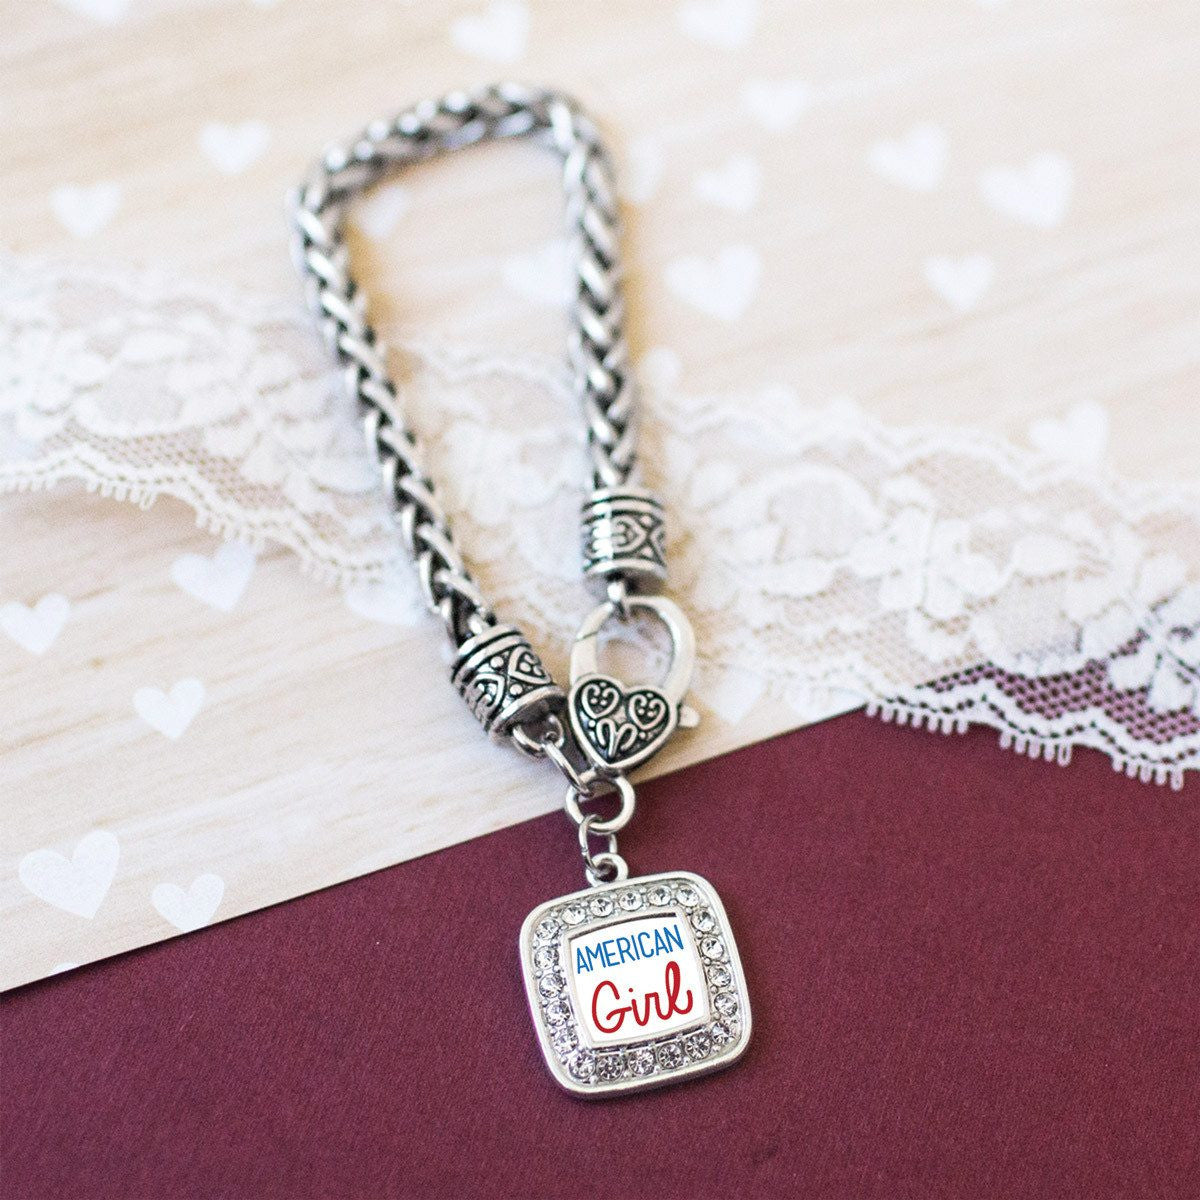 American Girl Charm Jewelry Collection